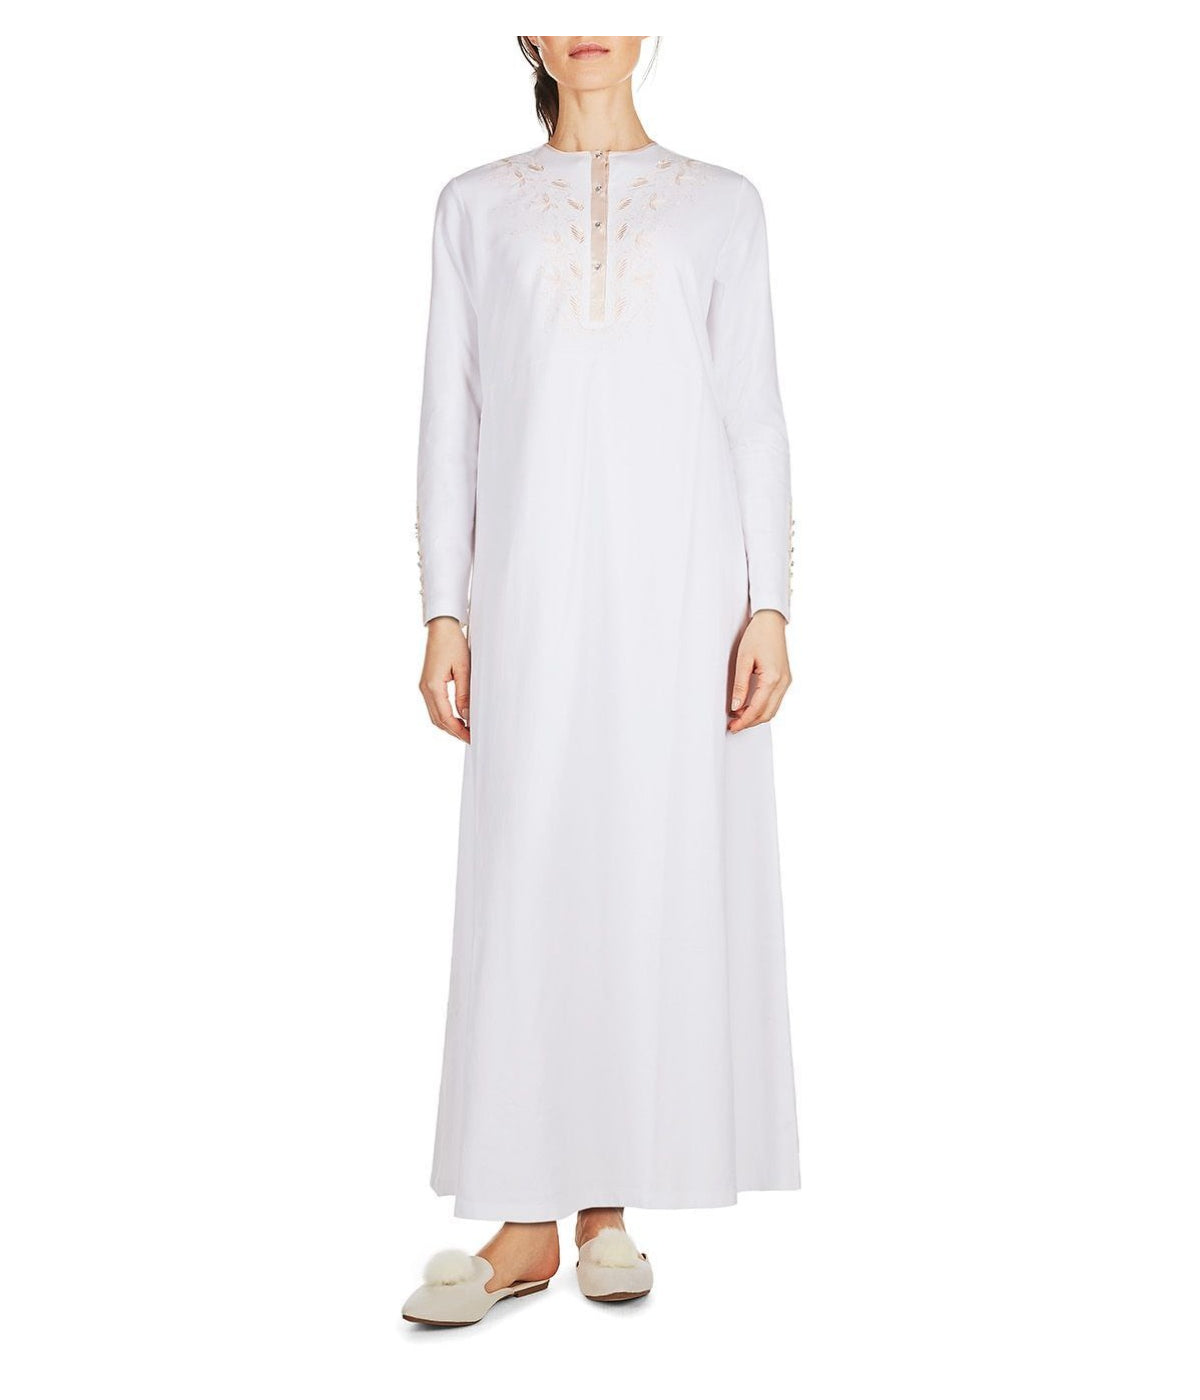 Women's Embroidered Bridal Full-Length Cotton Blend Sleeping Gown White